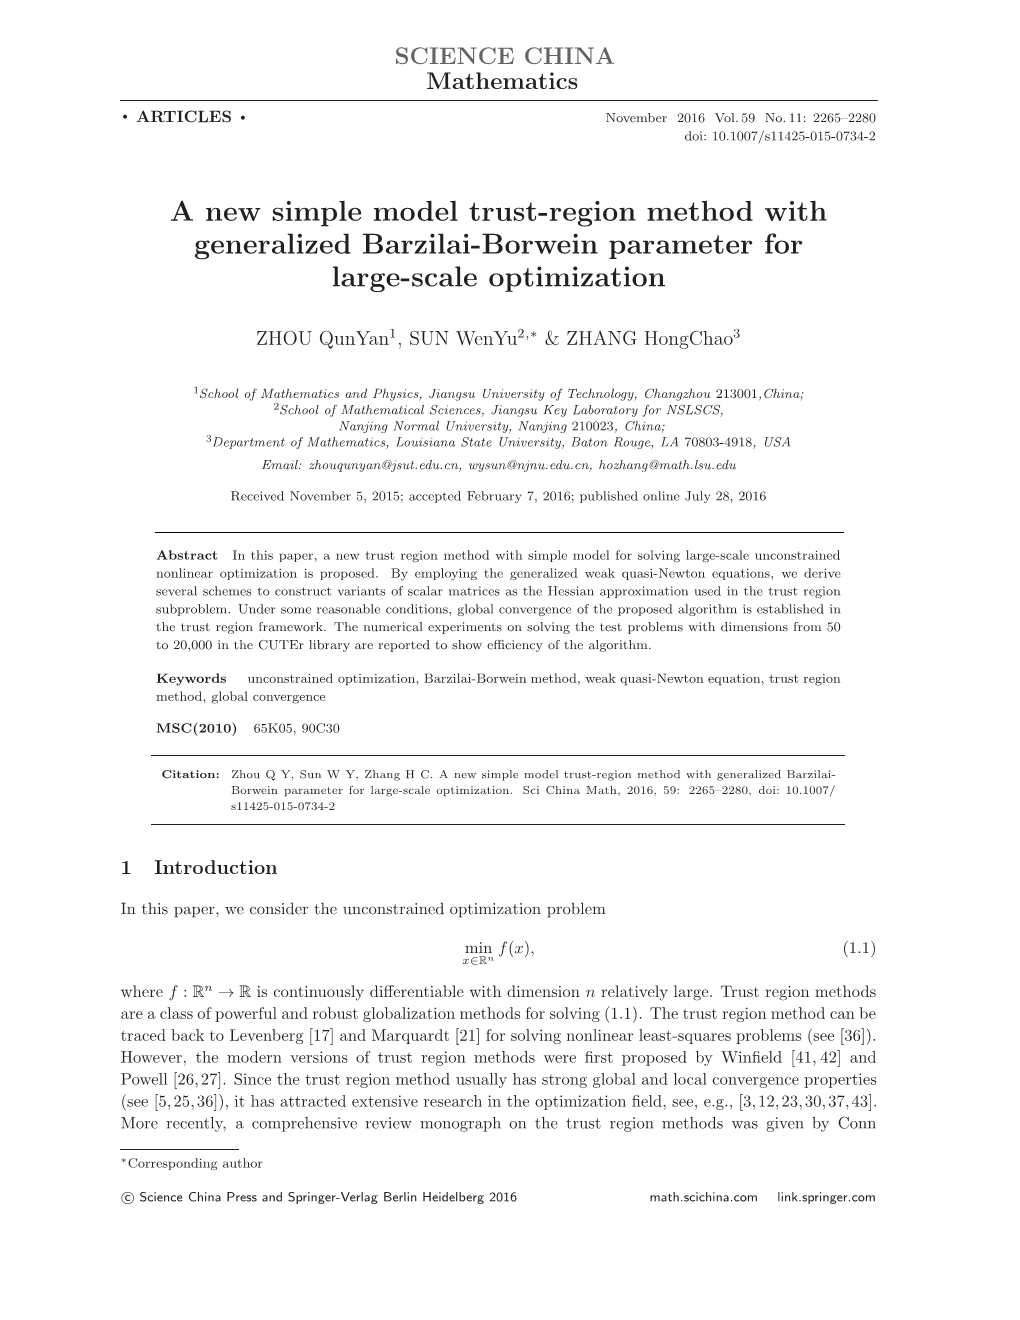 A New Simple Model Trust-Region Method with Generalized Barzilai-Borwein Parameter for Large-Scale Optimization